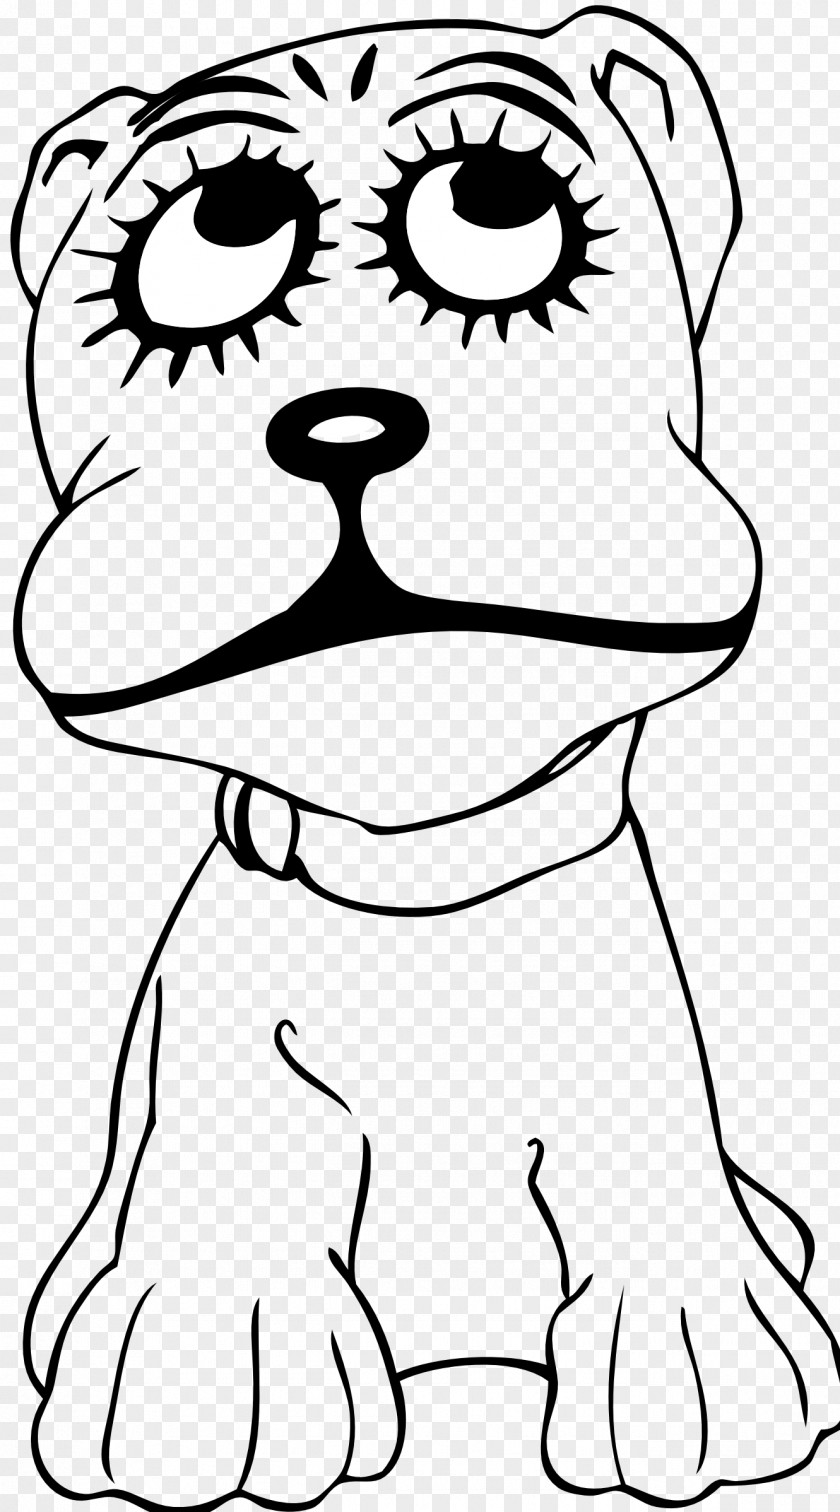 Line Drawings Of Dogs Dog Puppy Cartoon Clip Art PNG